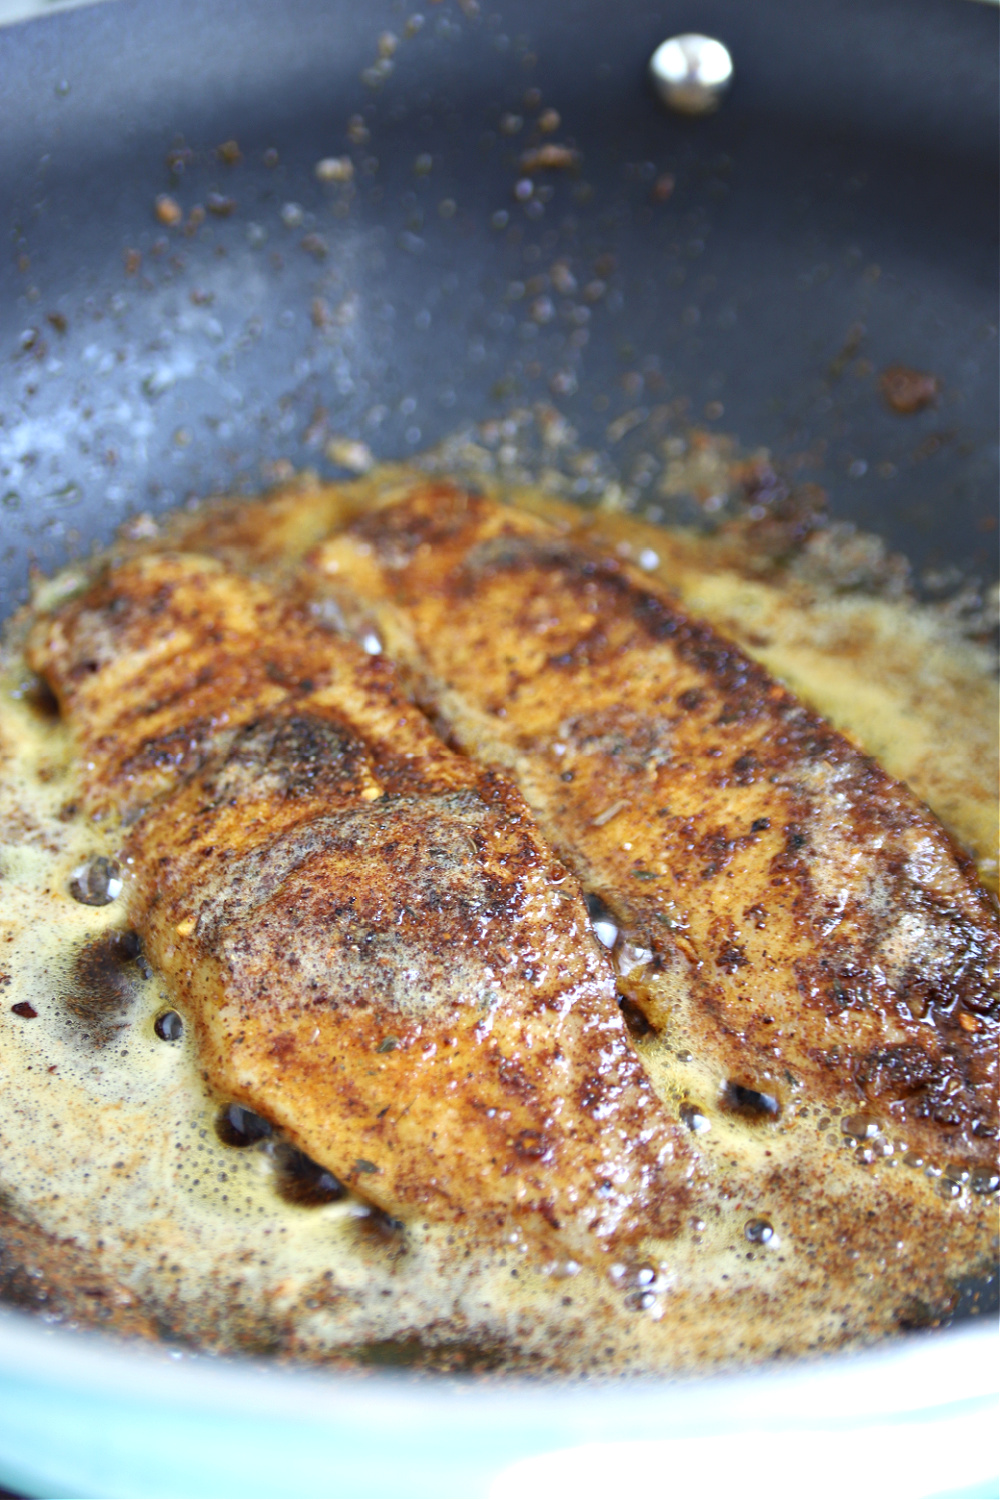 Iron skillet cooking herb and spice rub blackened tilapia.